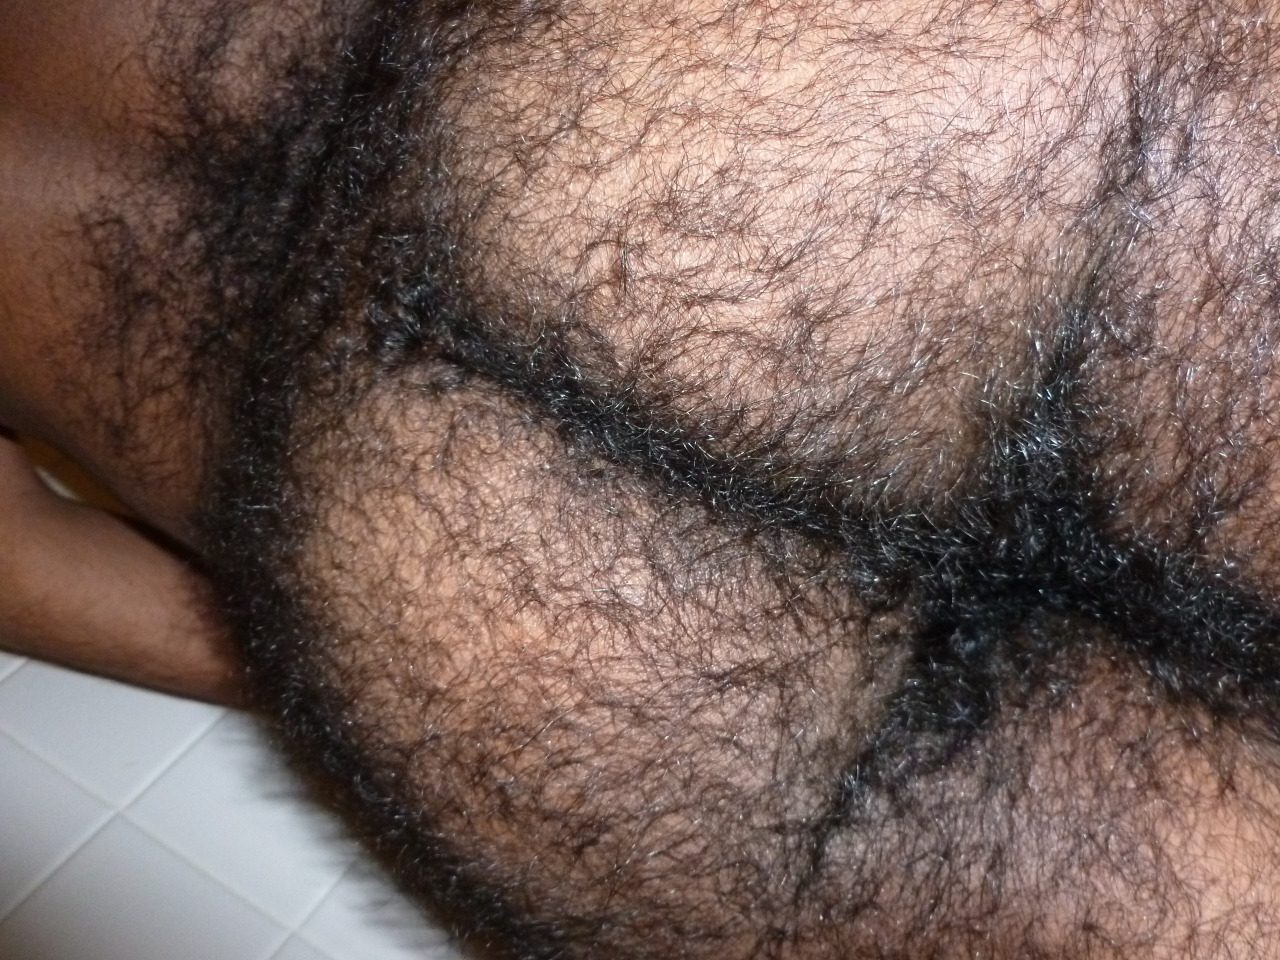 Male Hairy Ass 8